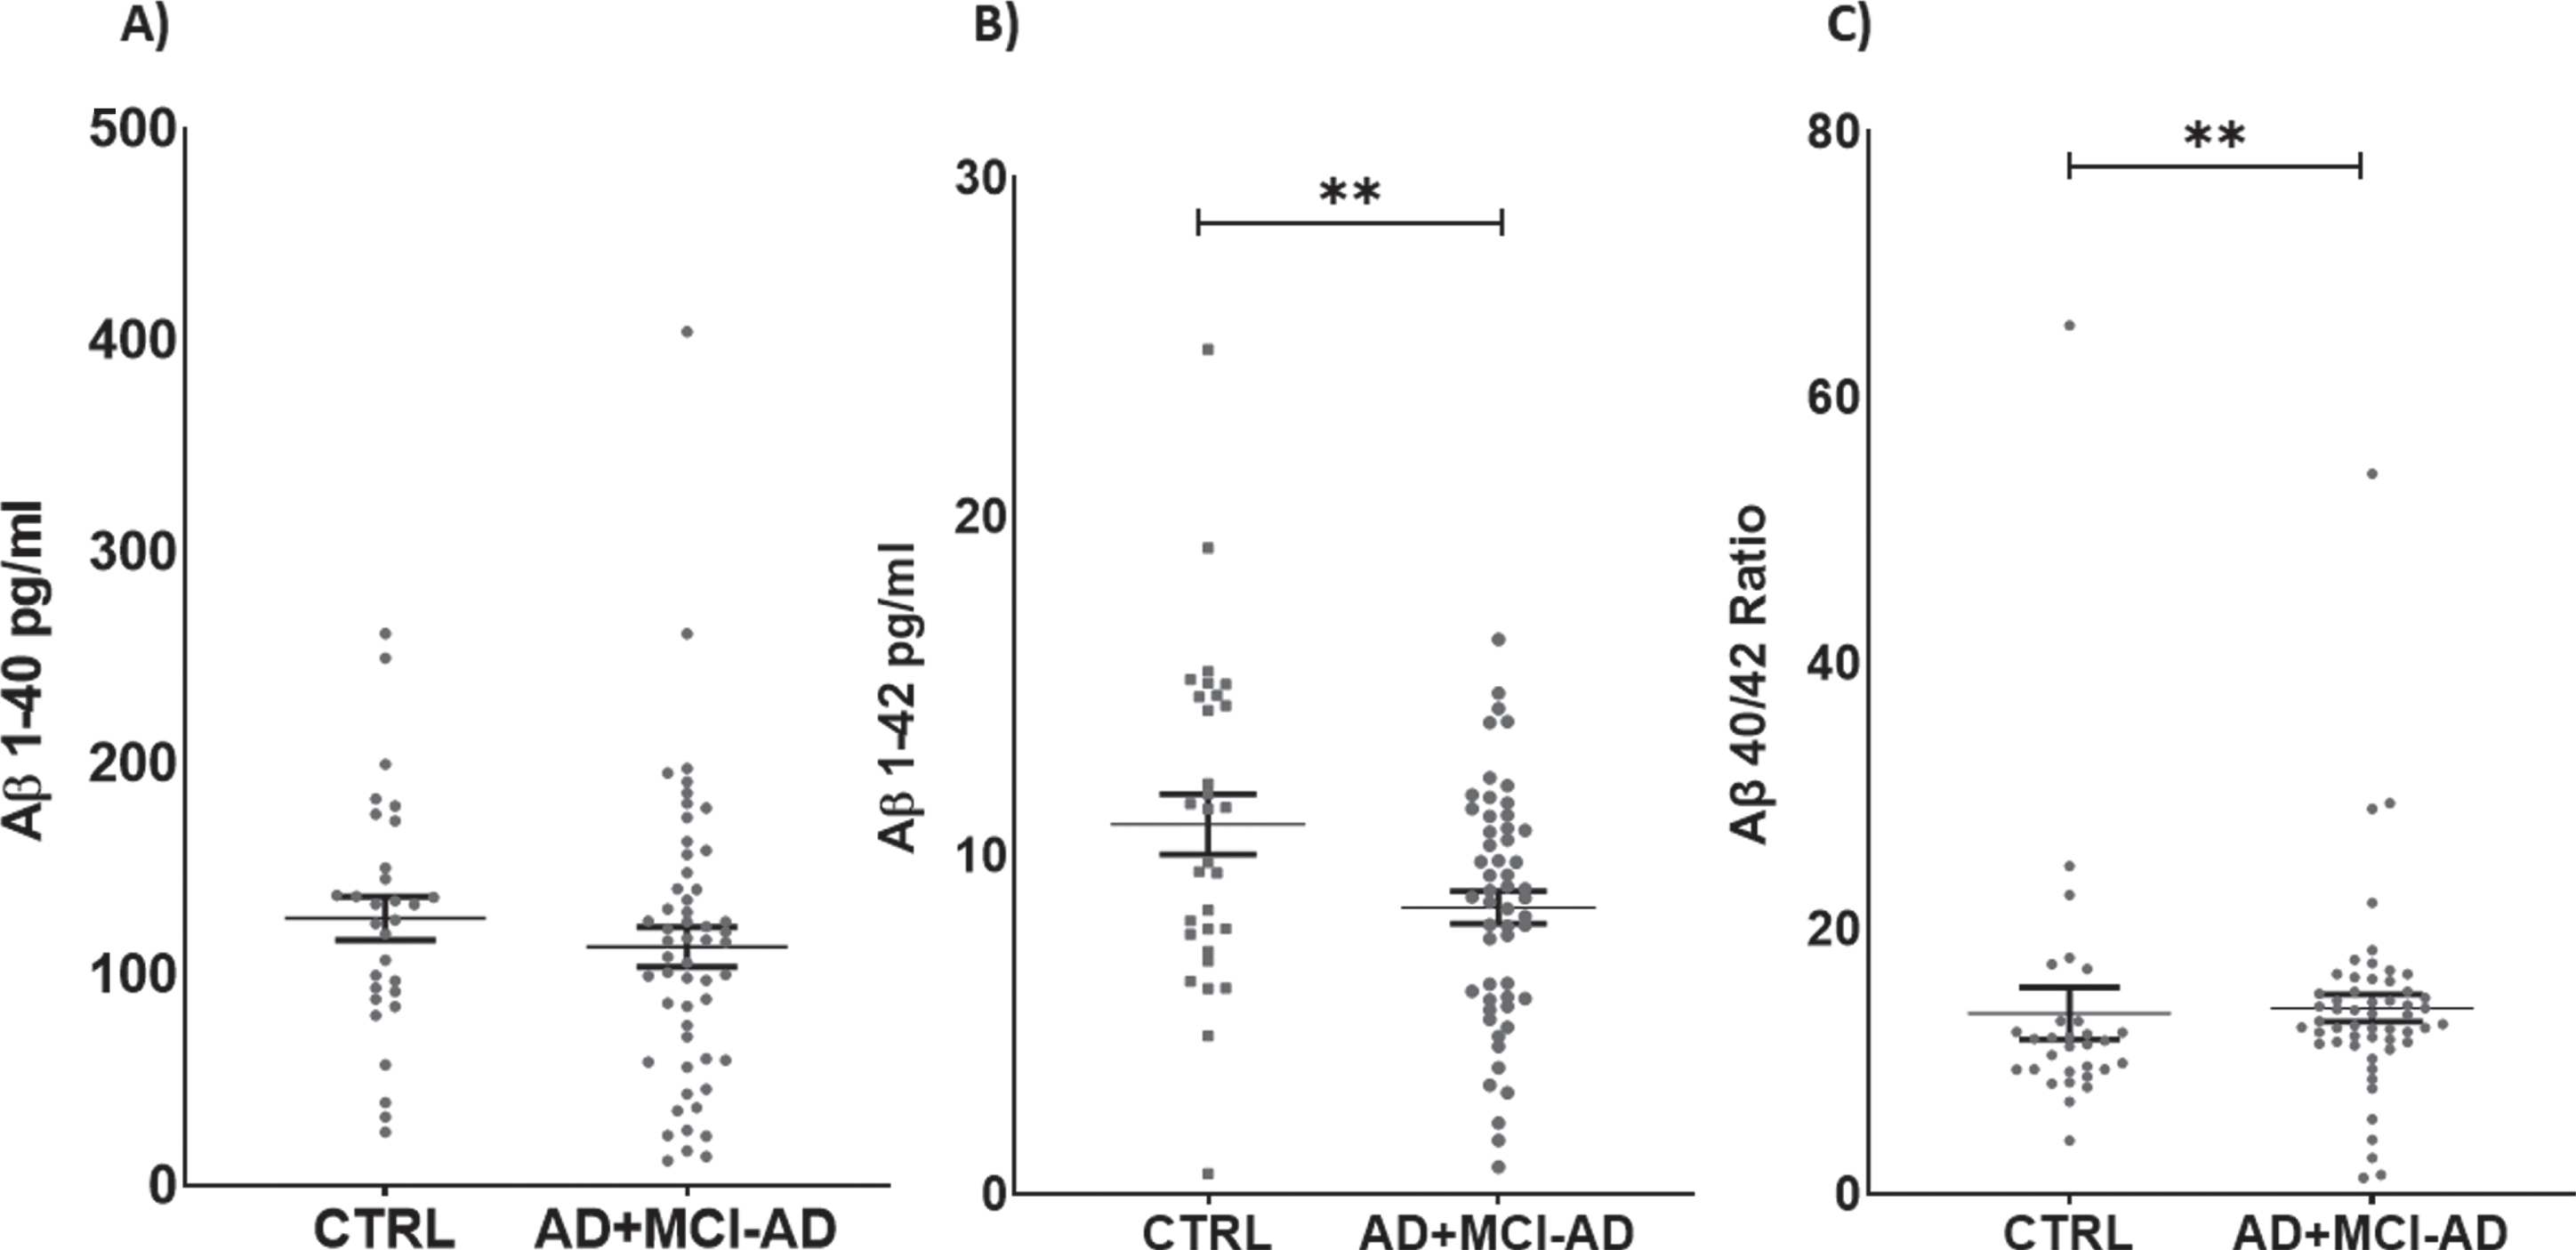 Serum levels of Aβ1 - 40 (A), Aβ1 - 42 (B), and ratio Aβ1 - 40/42 (C). Aβ1 - 42 is significantly lower in AD + MCI-AD group (mean±SEM: 8.760±0.476) as compared to CTRL group (mean±SEM: 10.590±0.887, p = 0.0090; t-test); on the contrary the Aβ40/42 ratio is higher in AD + MCI-AD (mean±SEM: 14.01±1.028) as compared to CTRL (mean±SEM: 13.62±1.953, p = 0.0042; Mann-Whitney test).